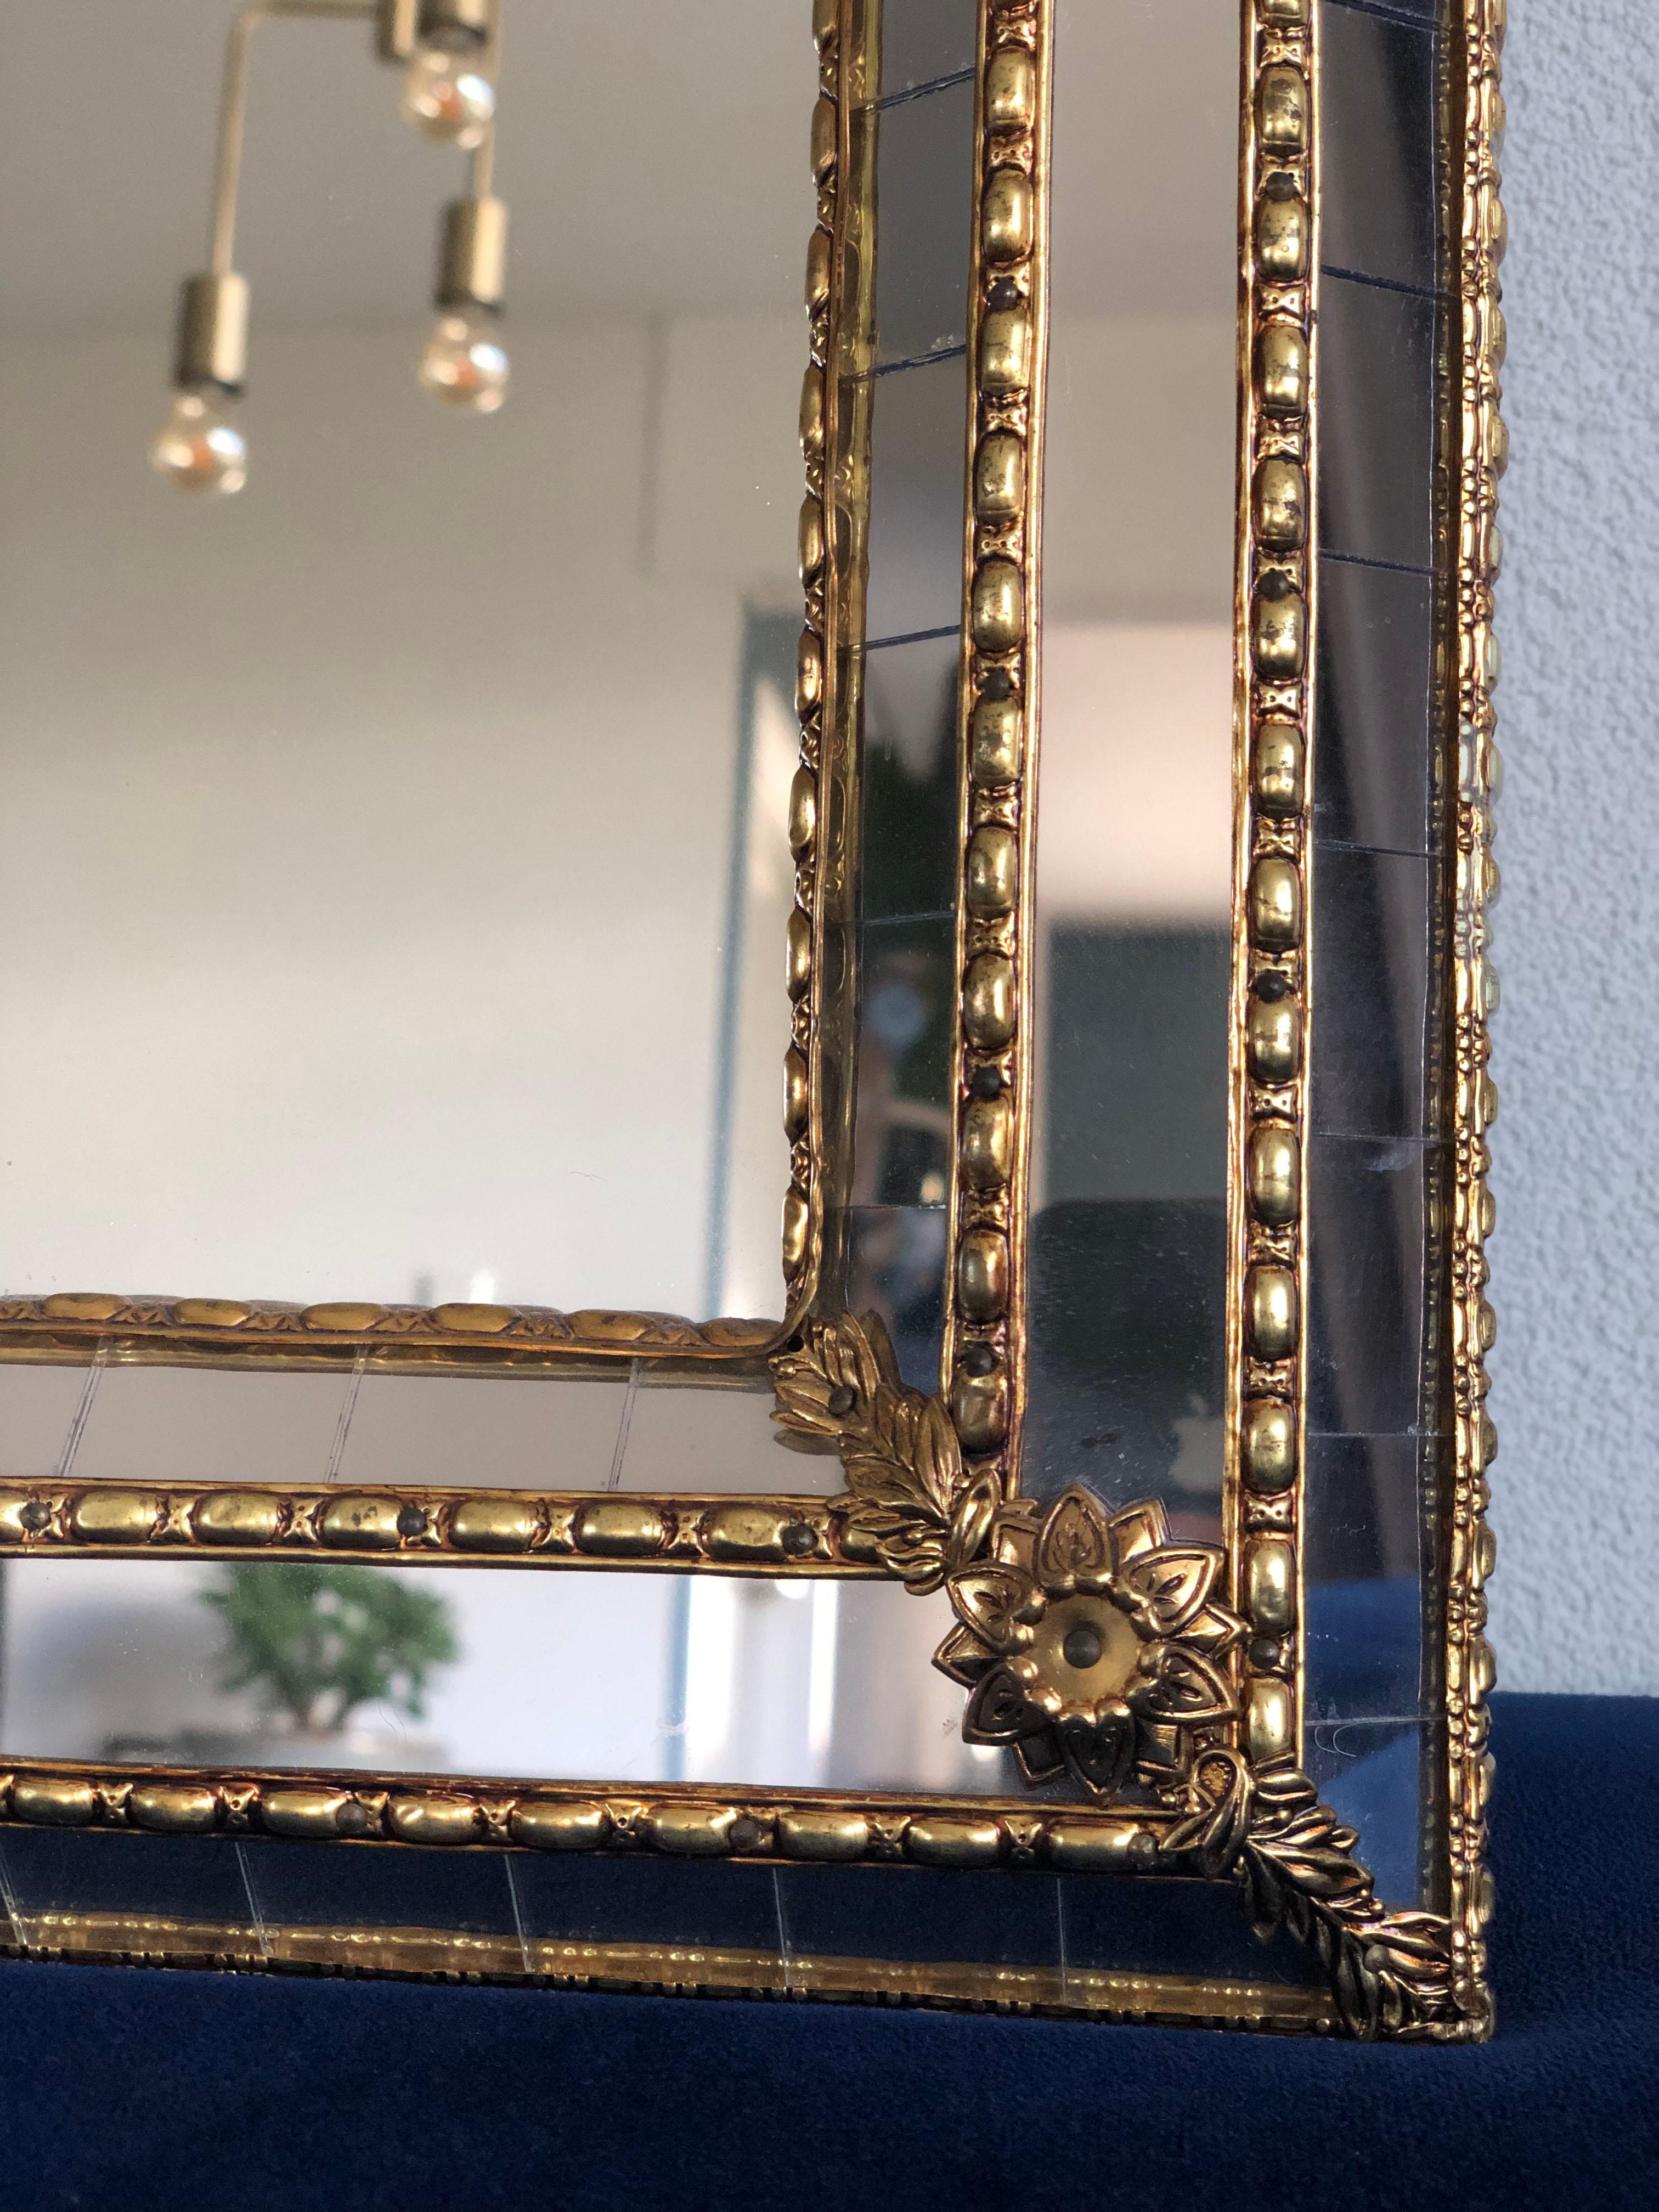 Beautiful handmade Venetian mirror from Spain 1990s. The frame with an arch at the top
has cut glass panes across the entire width, which is held together by a brass strip. The flawless mosaic trapezoidal mirror has a brass flower at each corner.